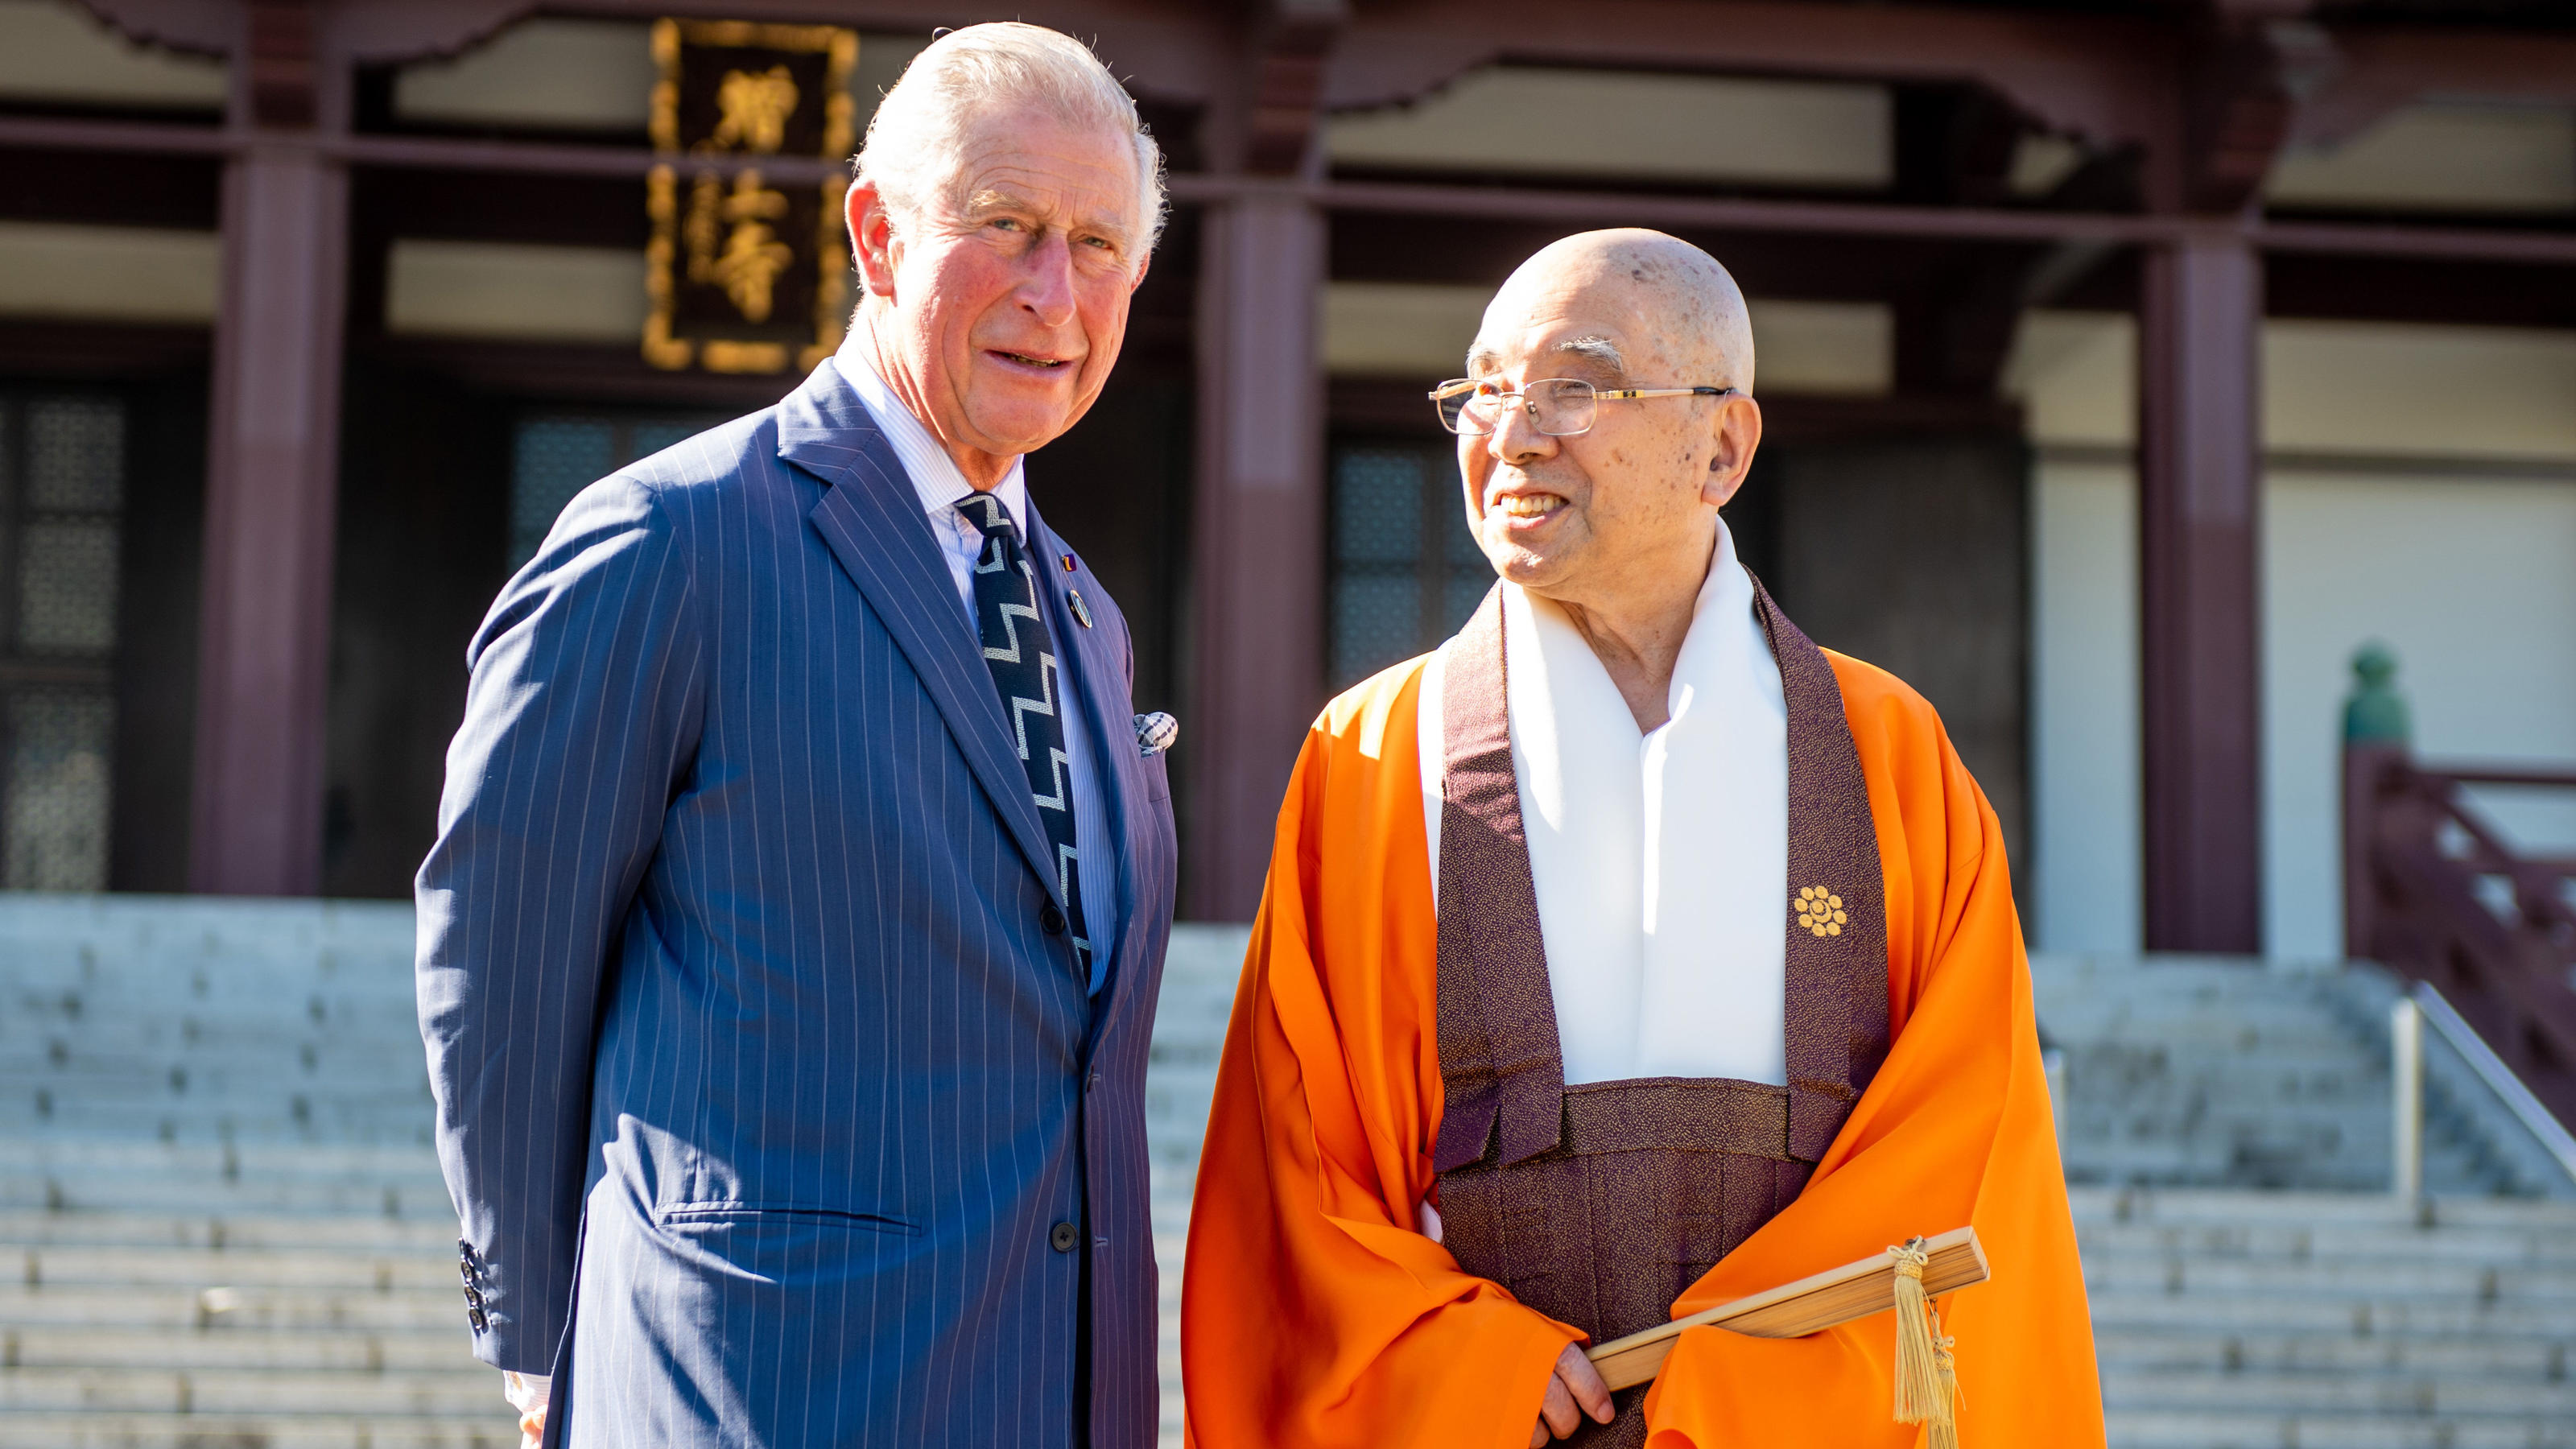  October 23, 2019, Tokyo, Japan: Prince Charles, Prince of Wales visits Zojoji Temple in Tokyo, Japan..Featuring: Prince Charles, Prince of Wales.Where: Tokyo, Japan.When: 23 Oct 2019.Credit: Dutch Press PhotoCover Images..NOT AVAILABLE FOR PUBLICATI